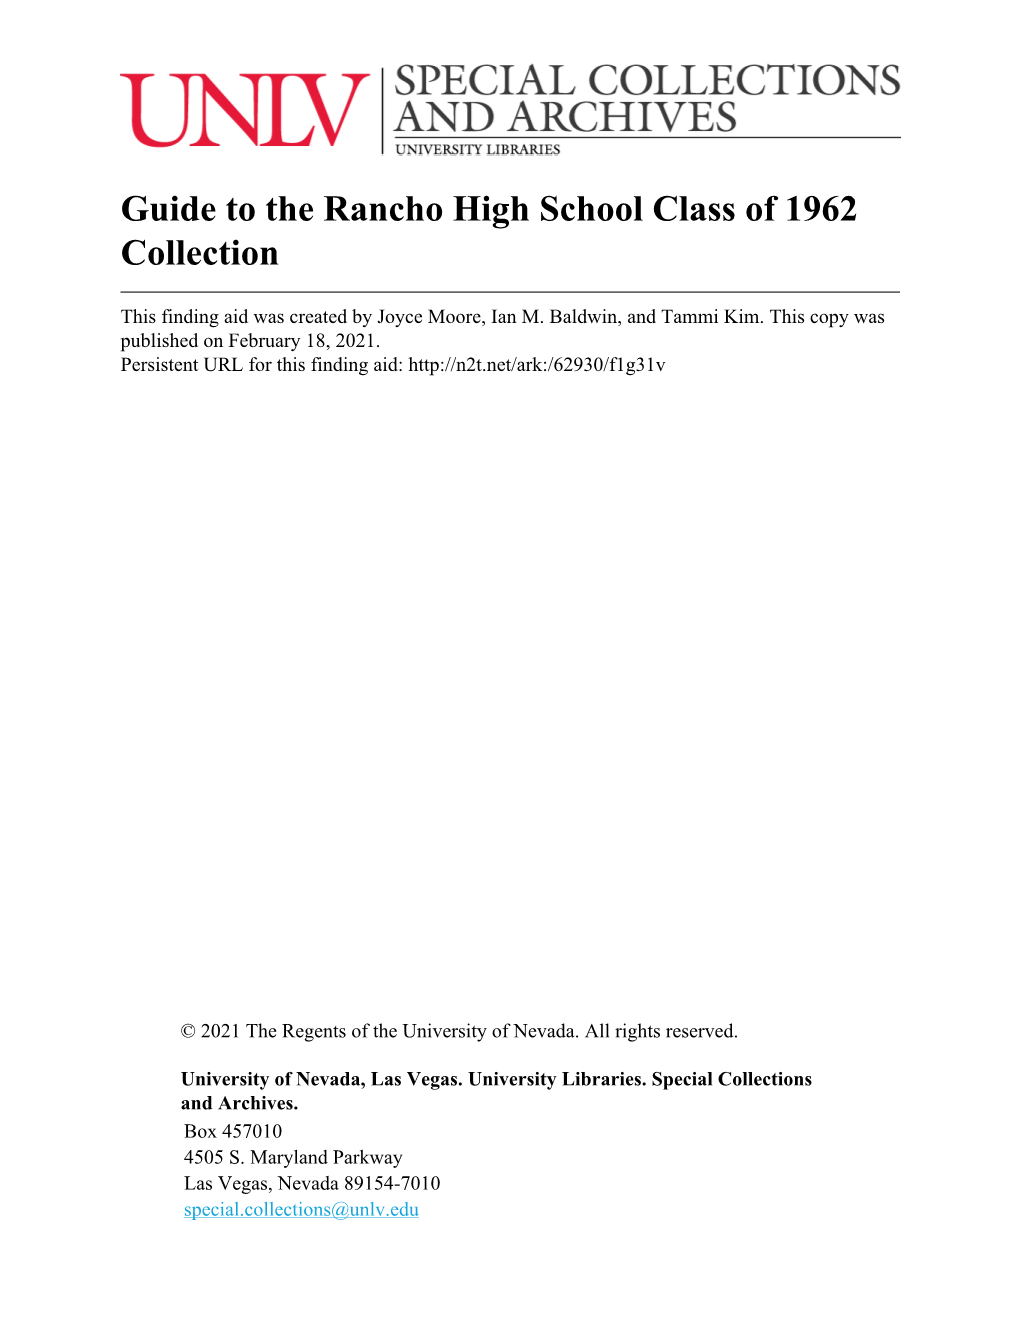 Guide to the Rancho High School Class of 1962 Collection